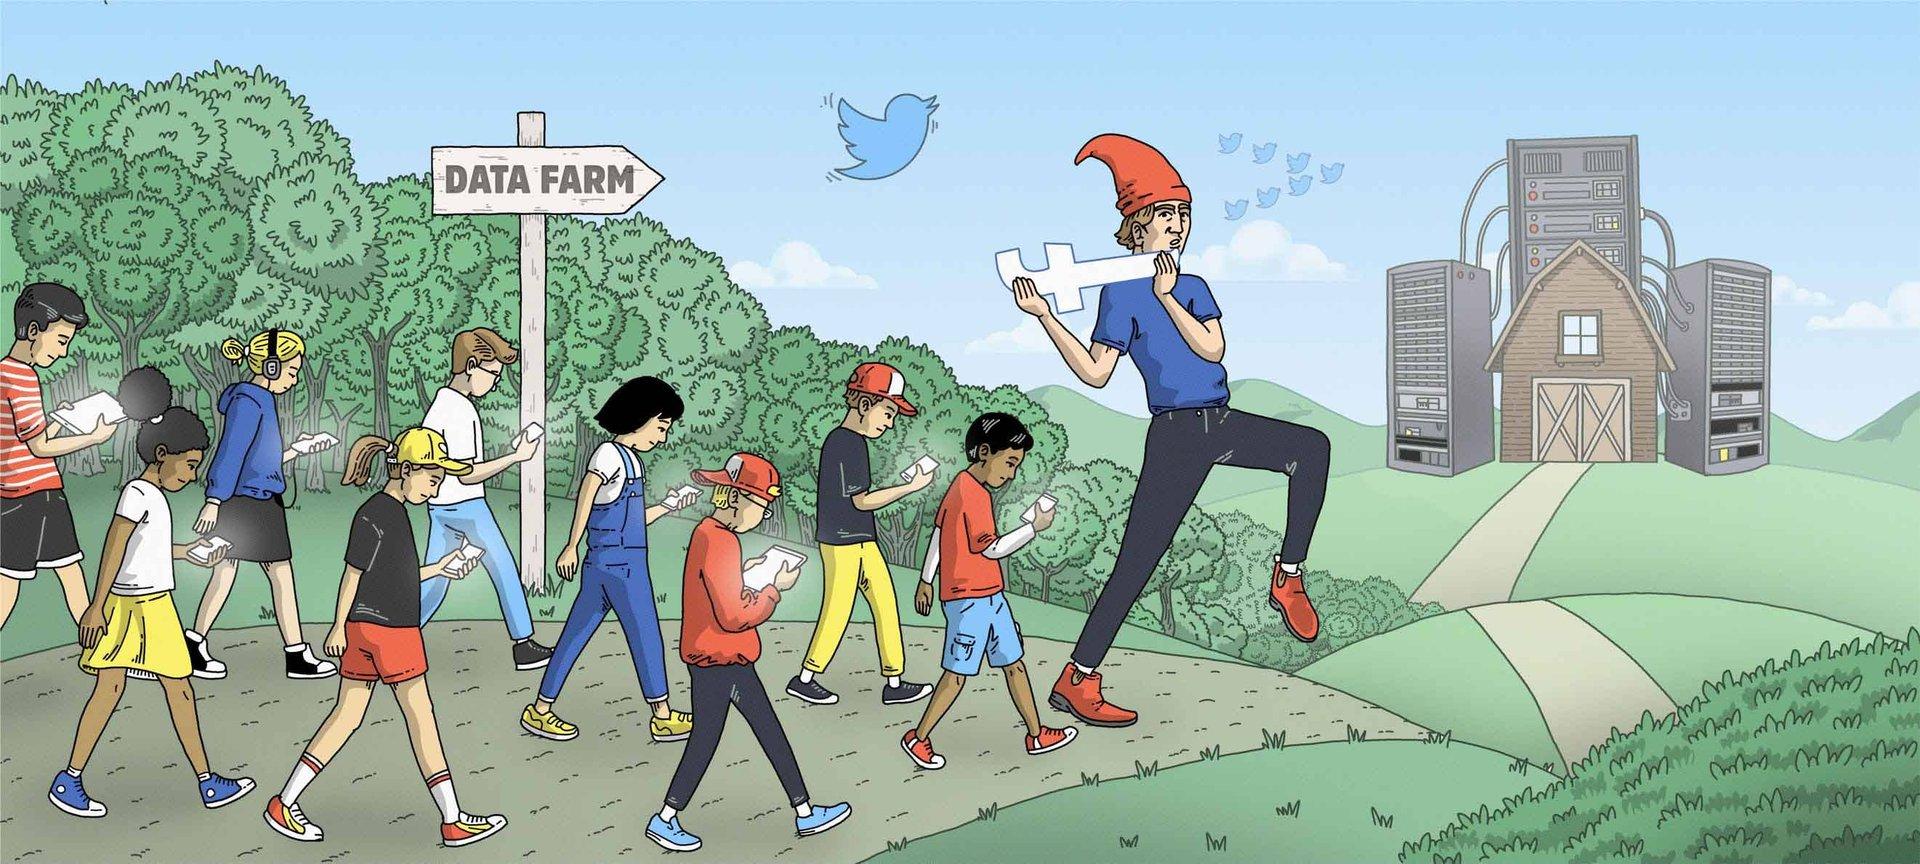 Group of children on mobile devices led by social media pied piper to data farm